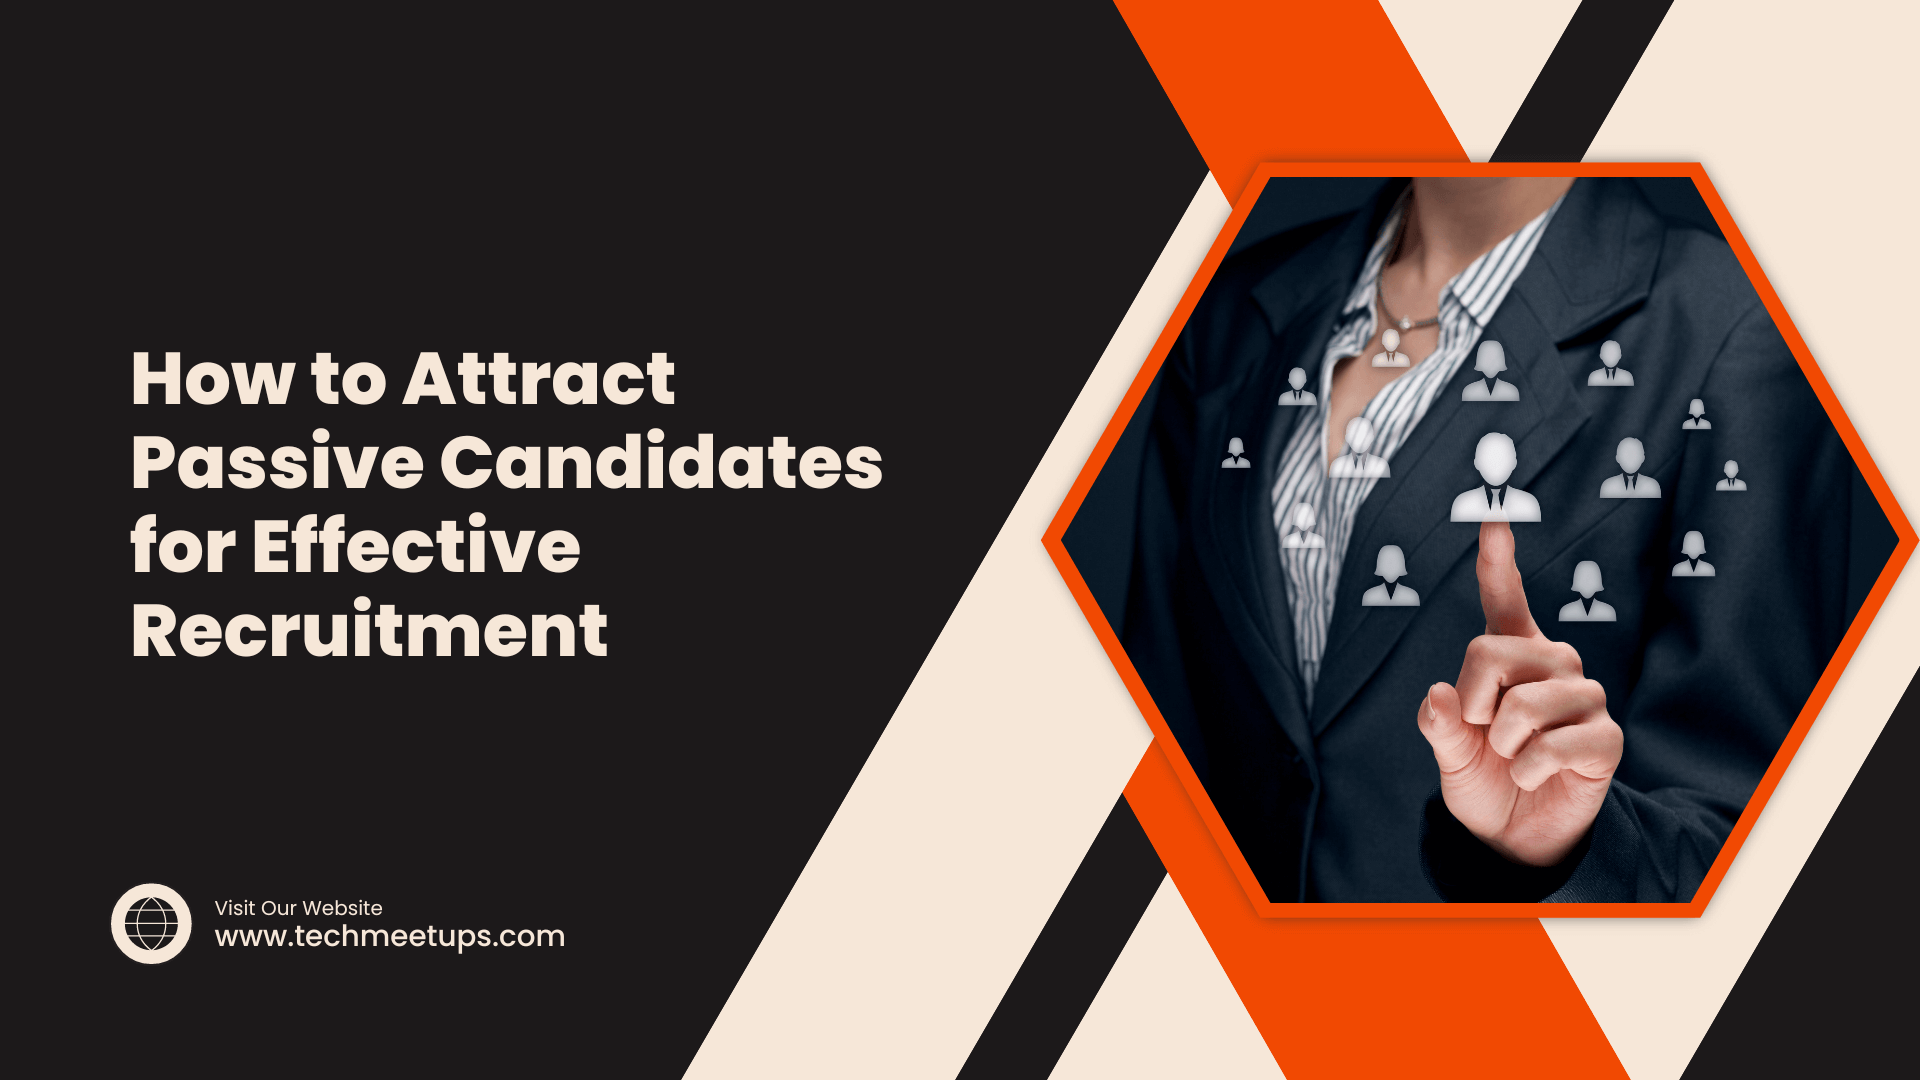 How to Attract Passive Candidates for Effective Recruitment